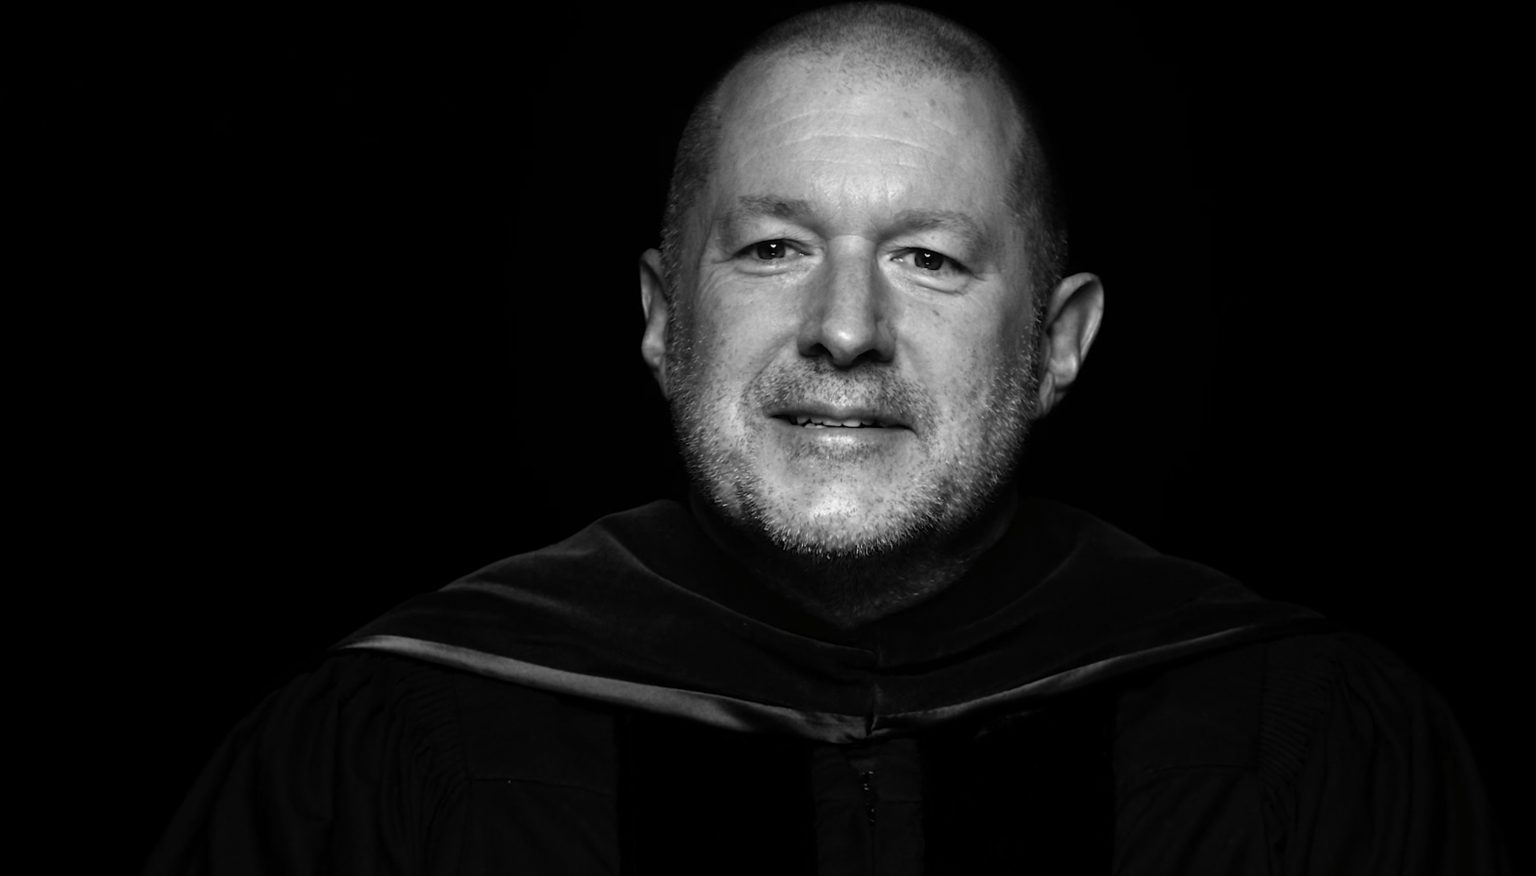 Former Apple design chief Jony Ive talks up big ideas in his virtual commencement speech.